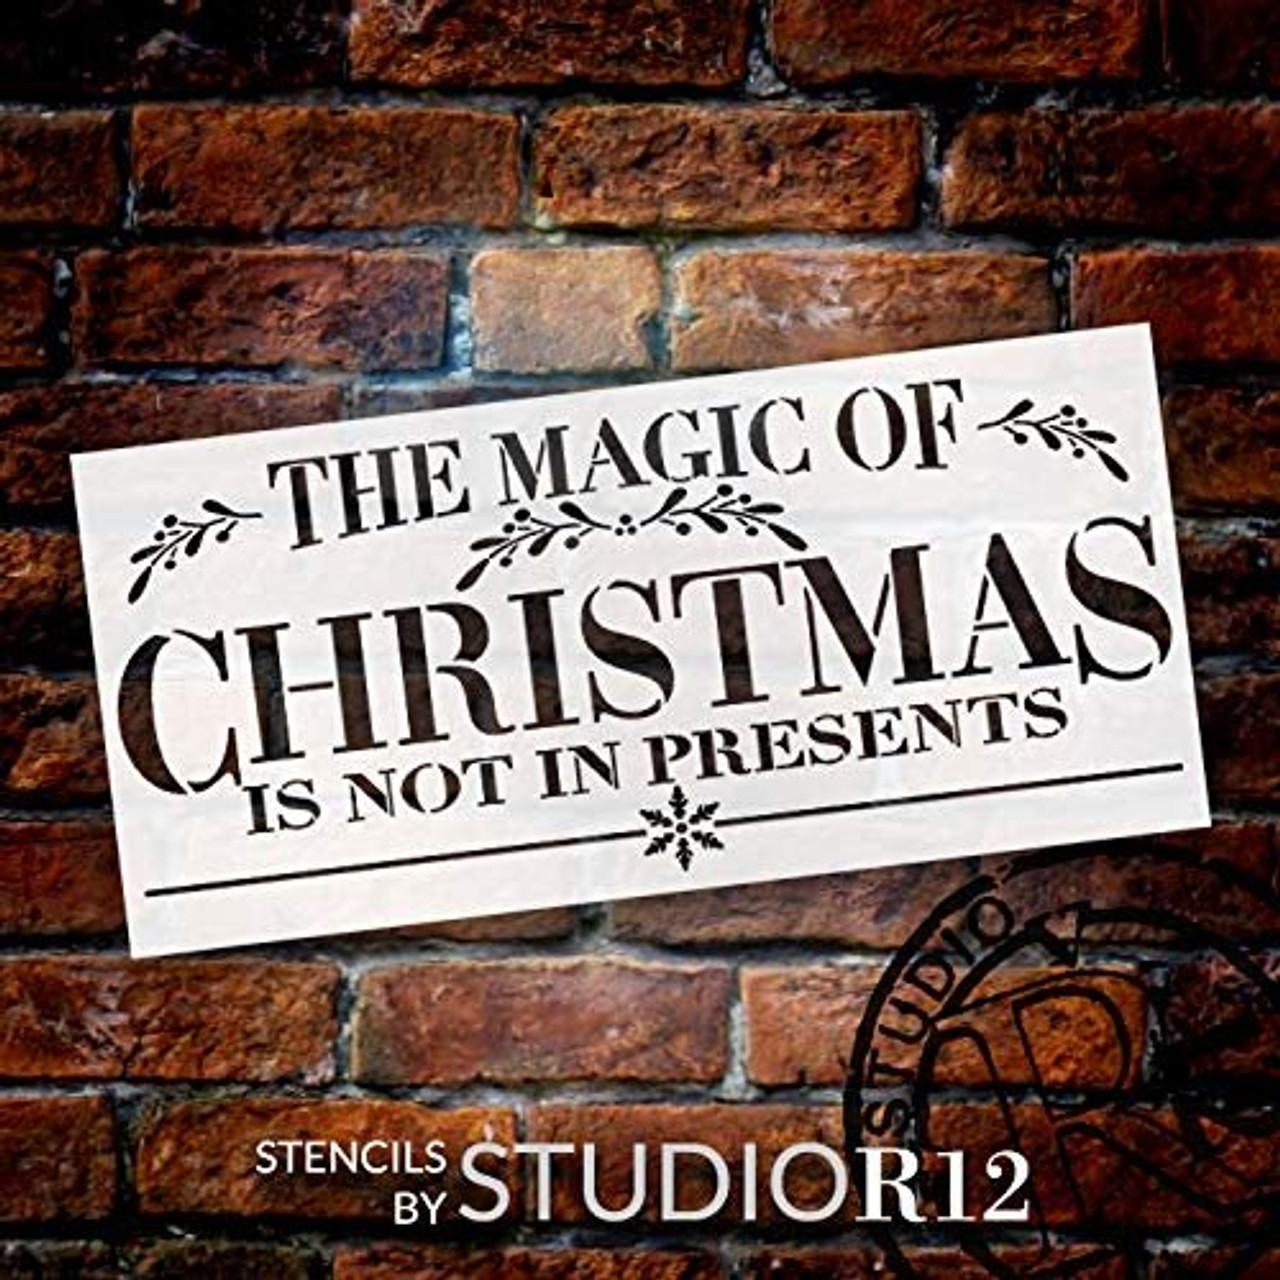 Magic of Christmas is Not in Presents Stencil by StudioR12 - Snowflake - Mistletoe | Reusable Mylar Template Paint Wood Sign | Craft Holiday Home Decor Rustic DIY Faith Gift | Select Size